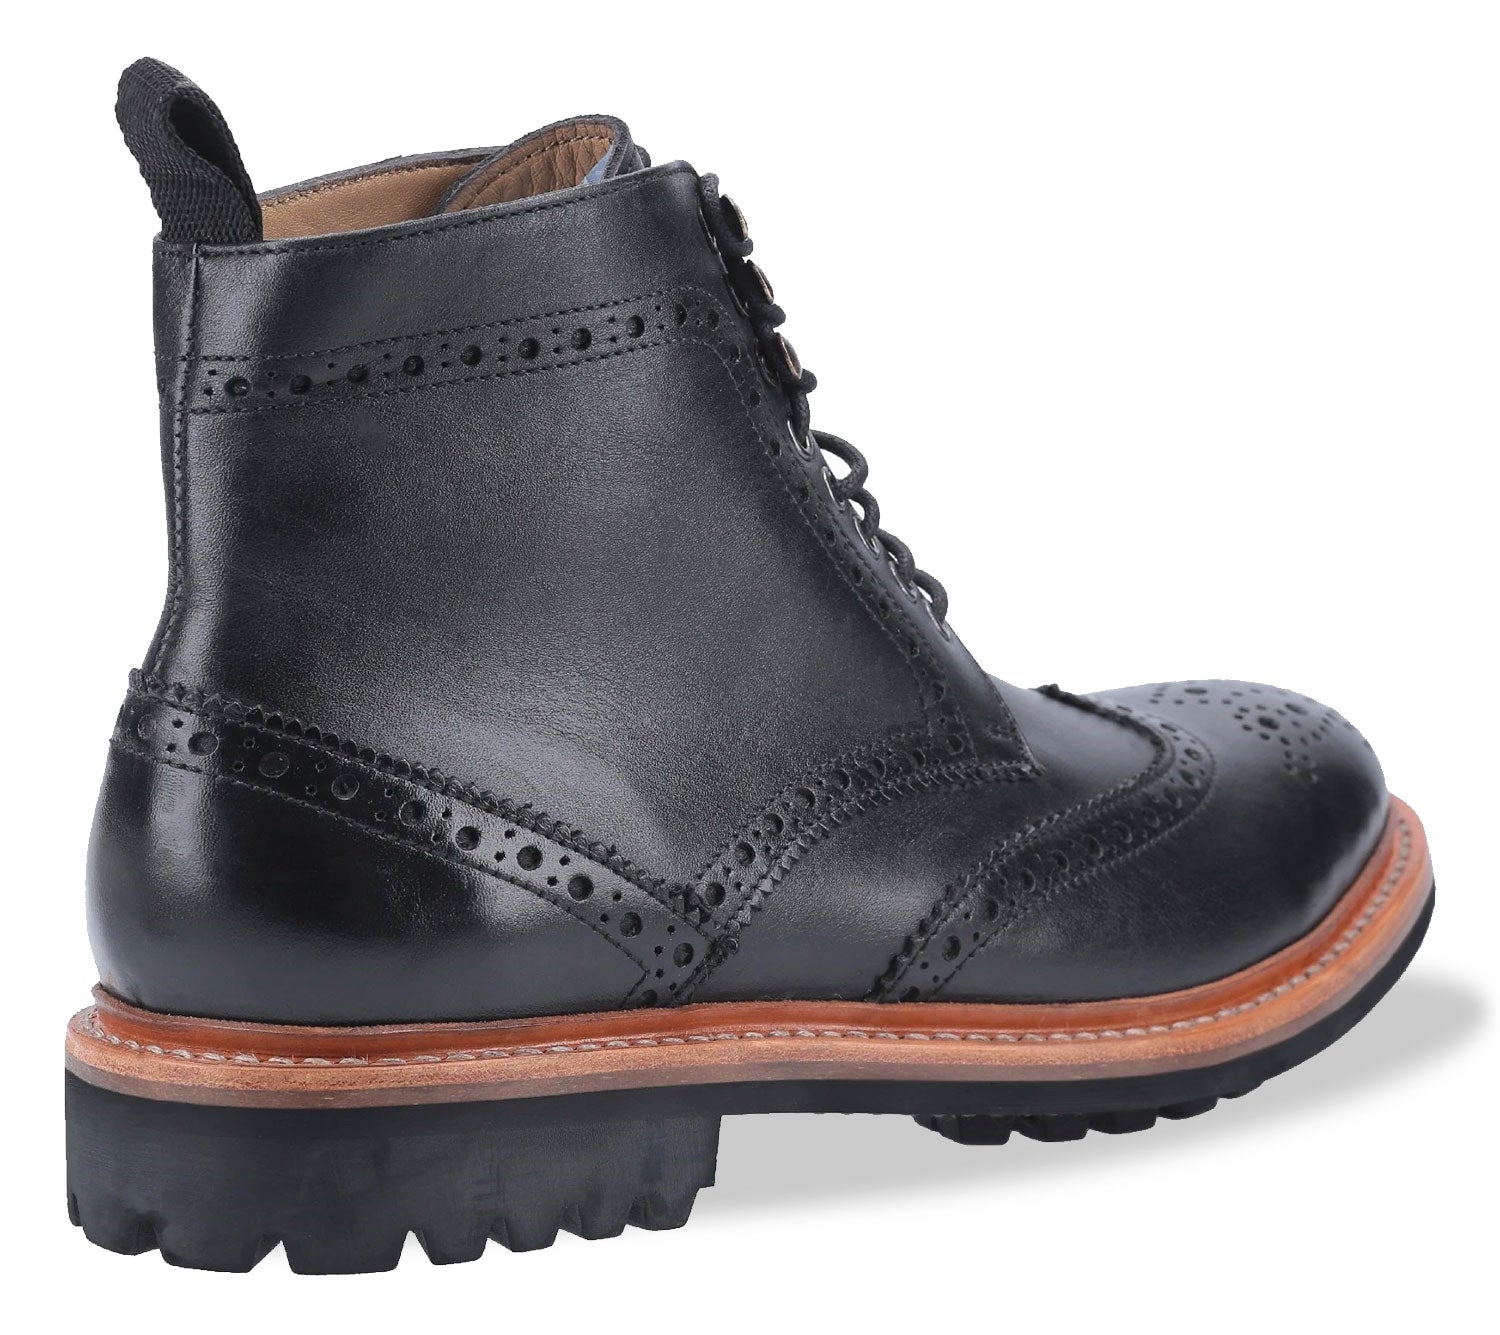 Black with tan leather goodyear welt 